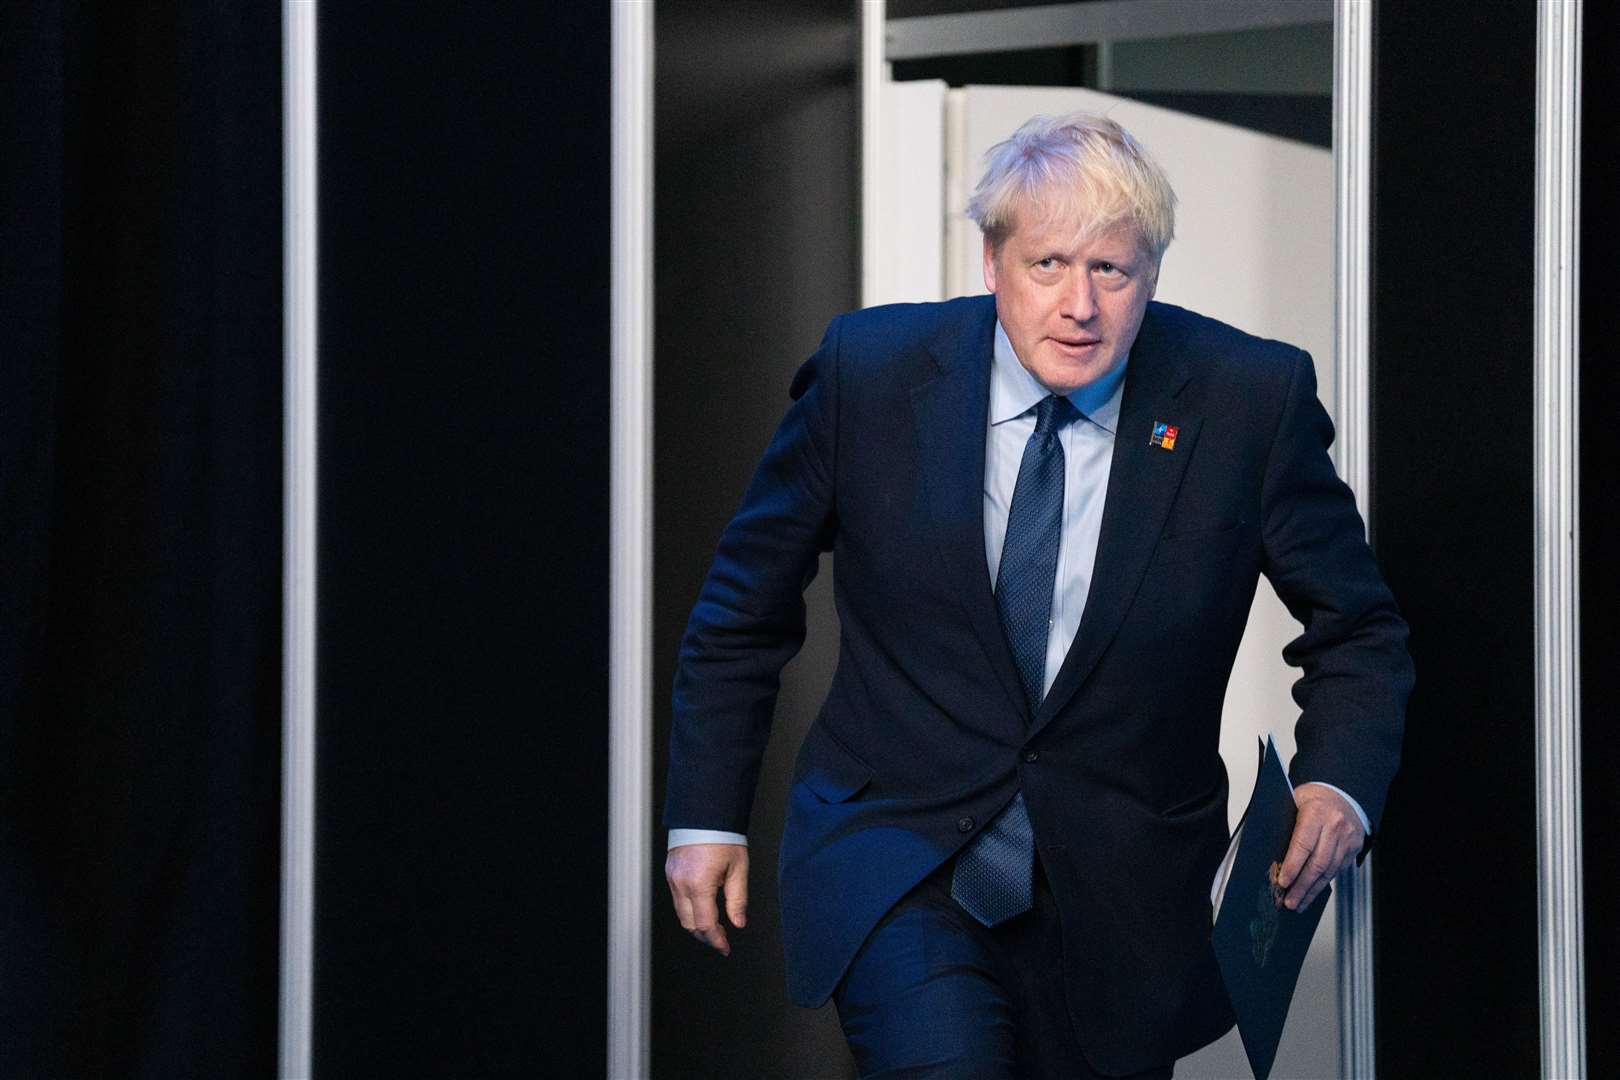 Boris Johnson remains under pressure about what exactly he knew regarding allegations against former deputy chief whip Chris Pincher (Stefan Rousseau/PA)